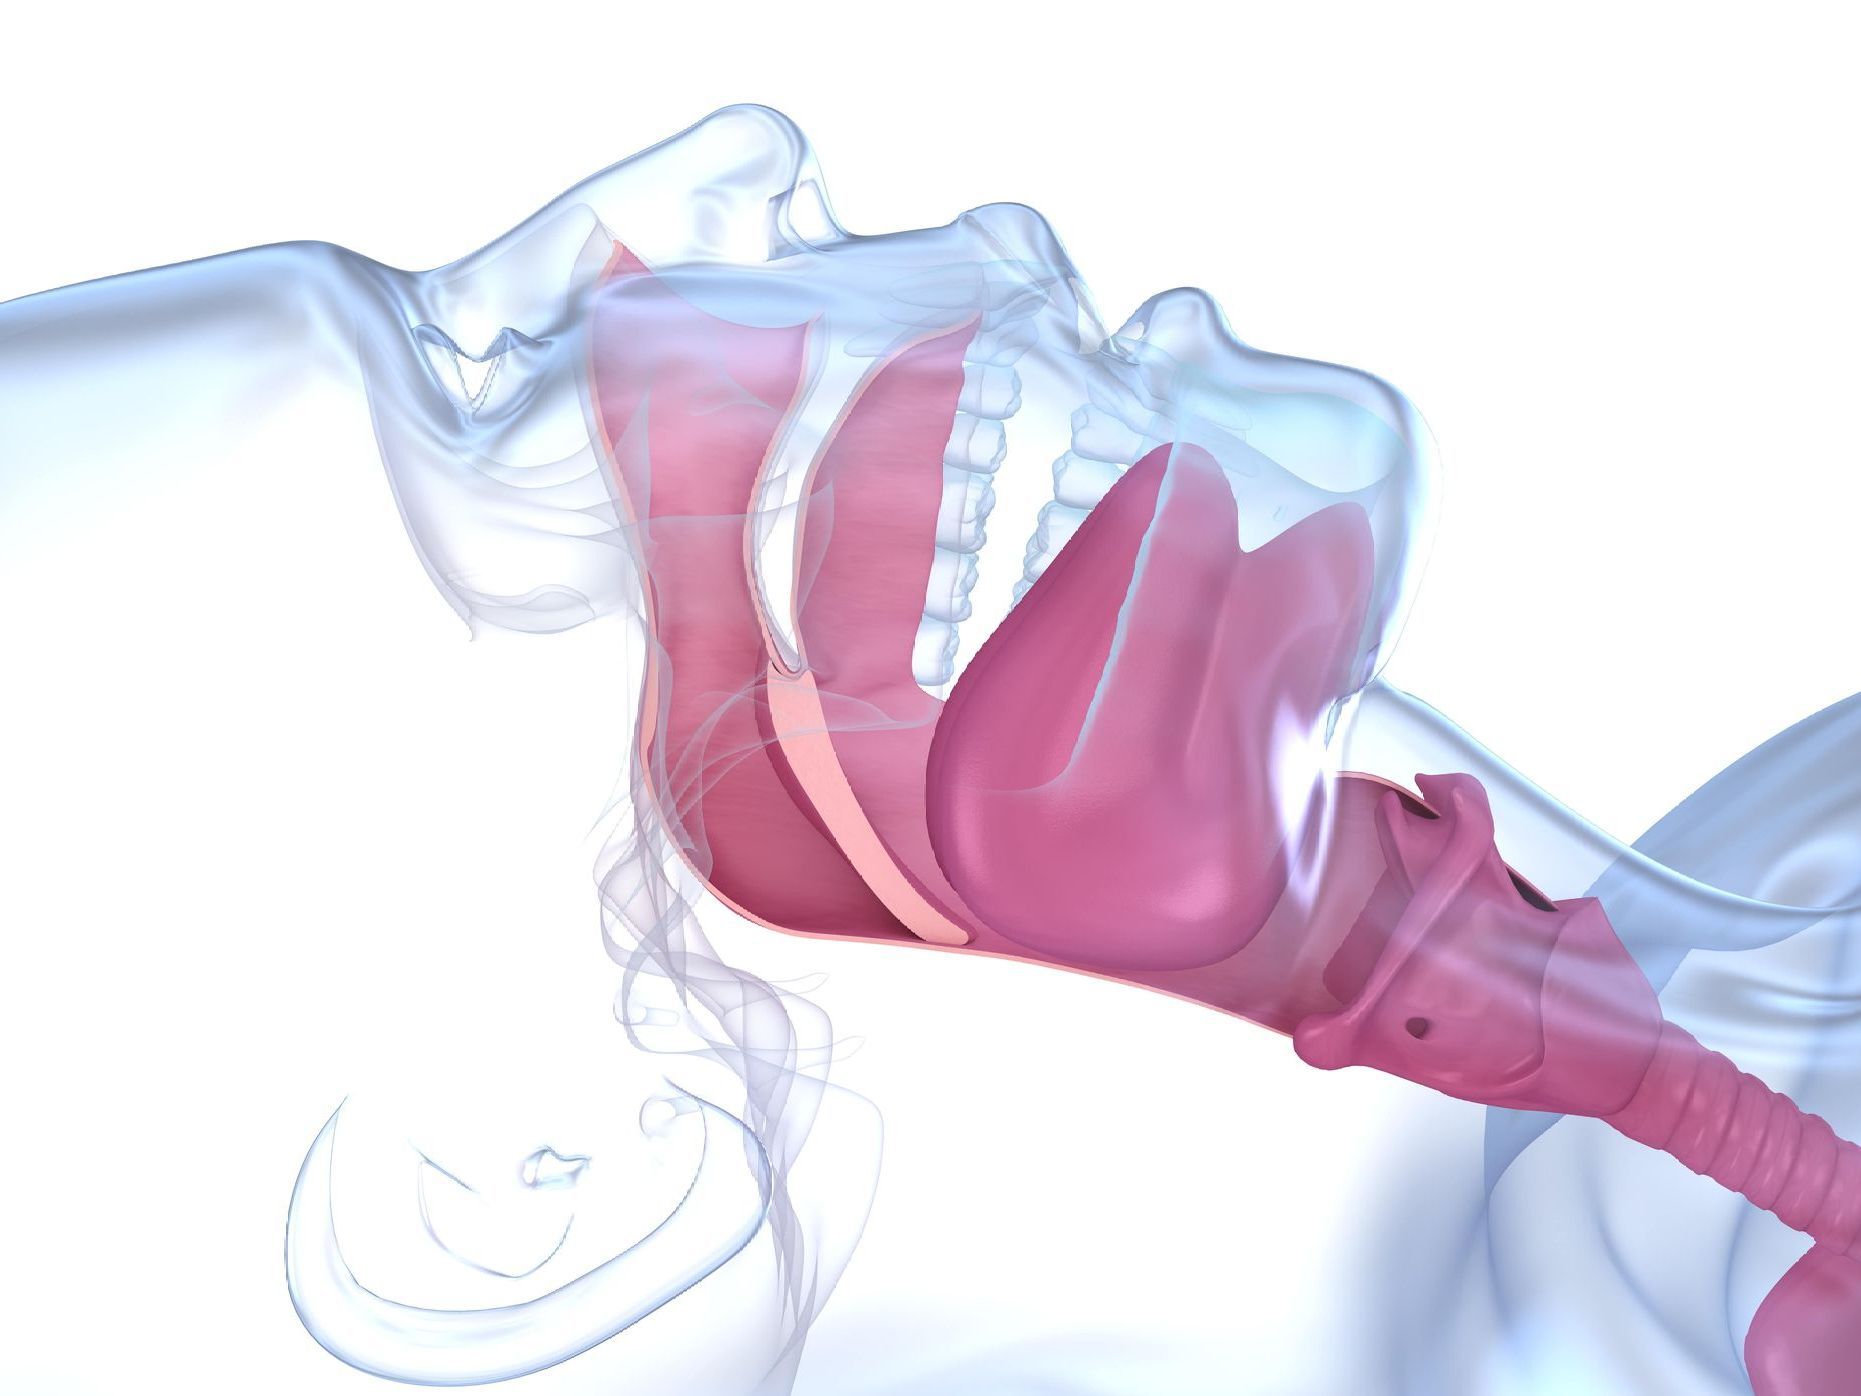 A computer generated image of a person's mouth and throat